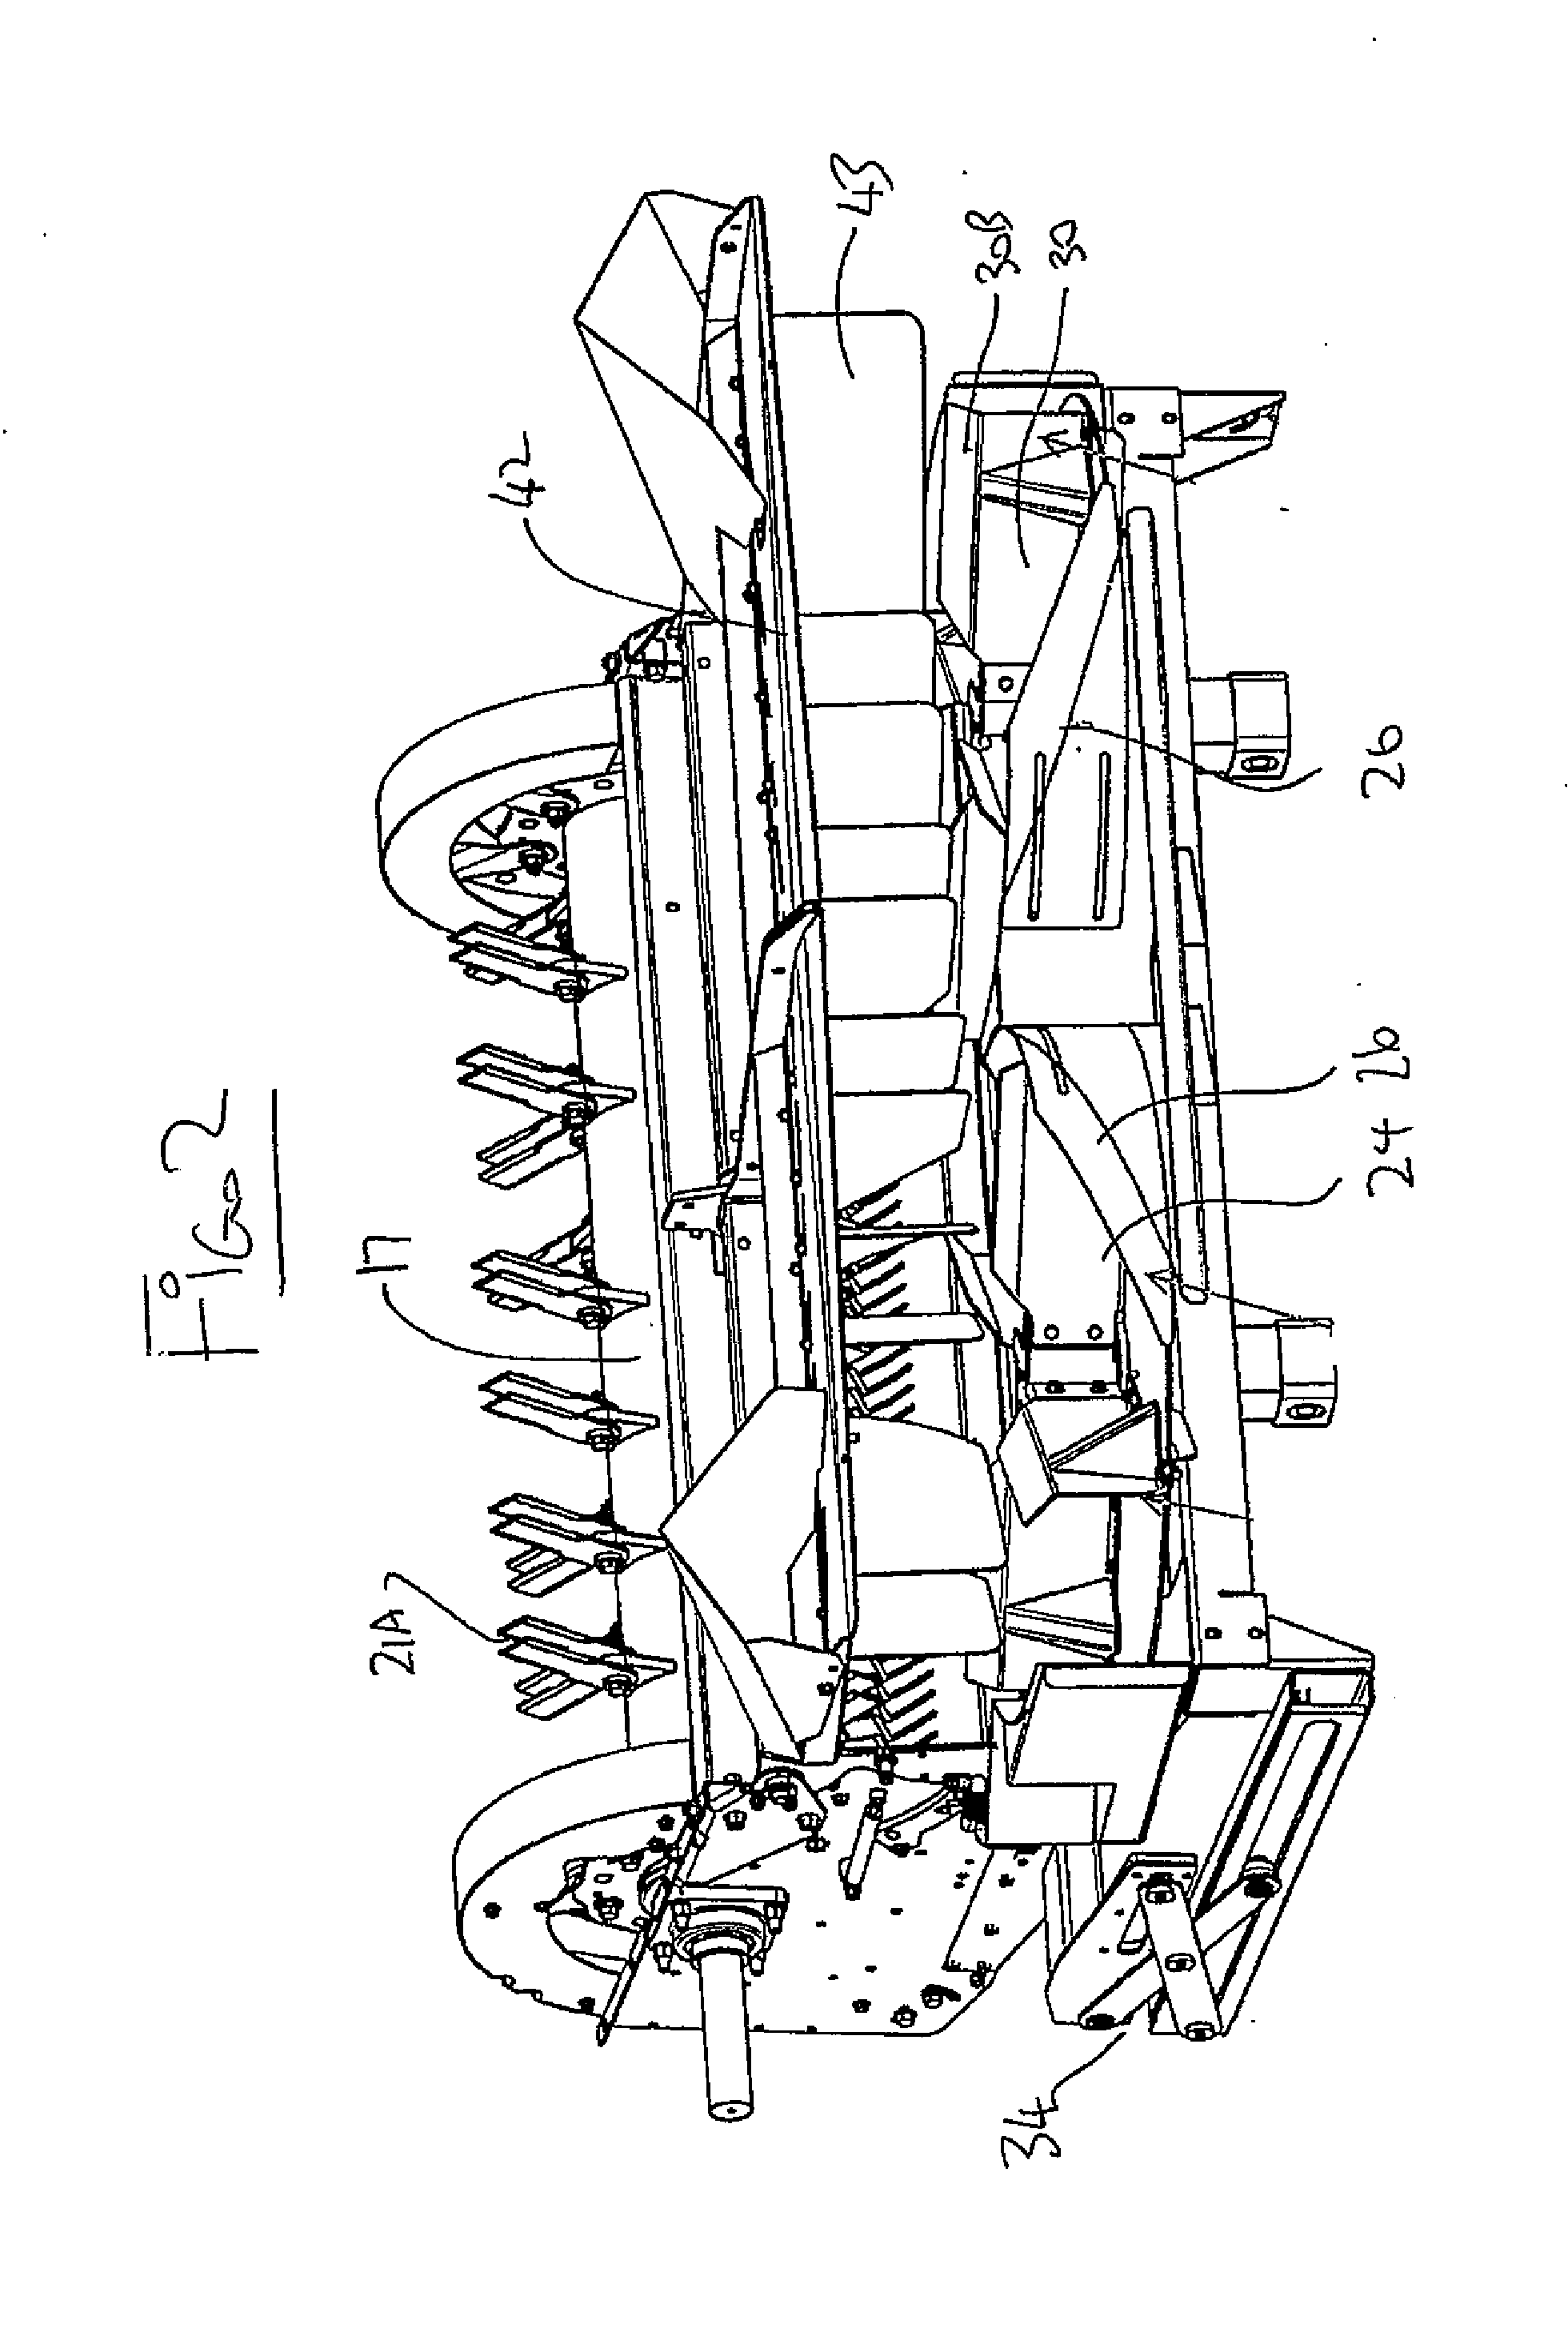 Apparatus for Chopping and Discharging Straw from a Combine Harvester